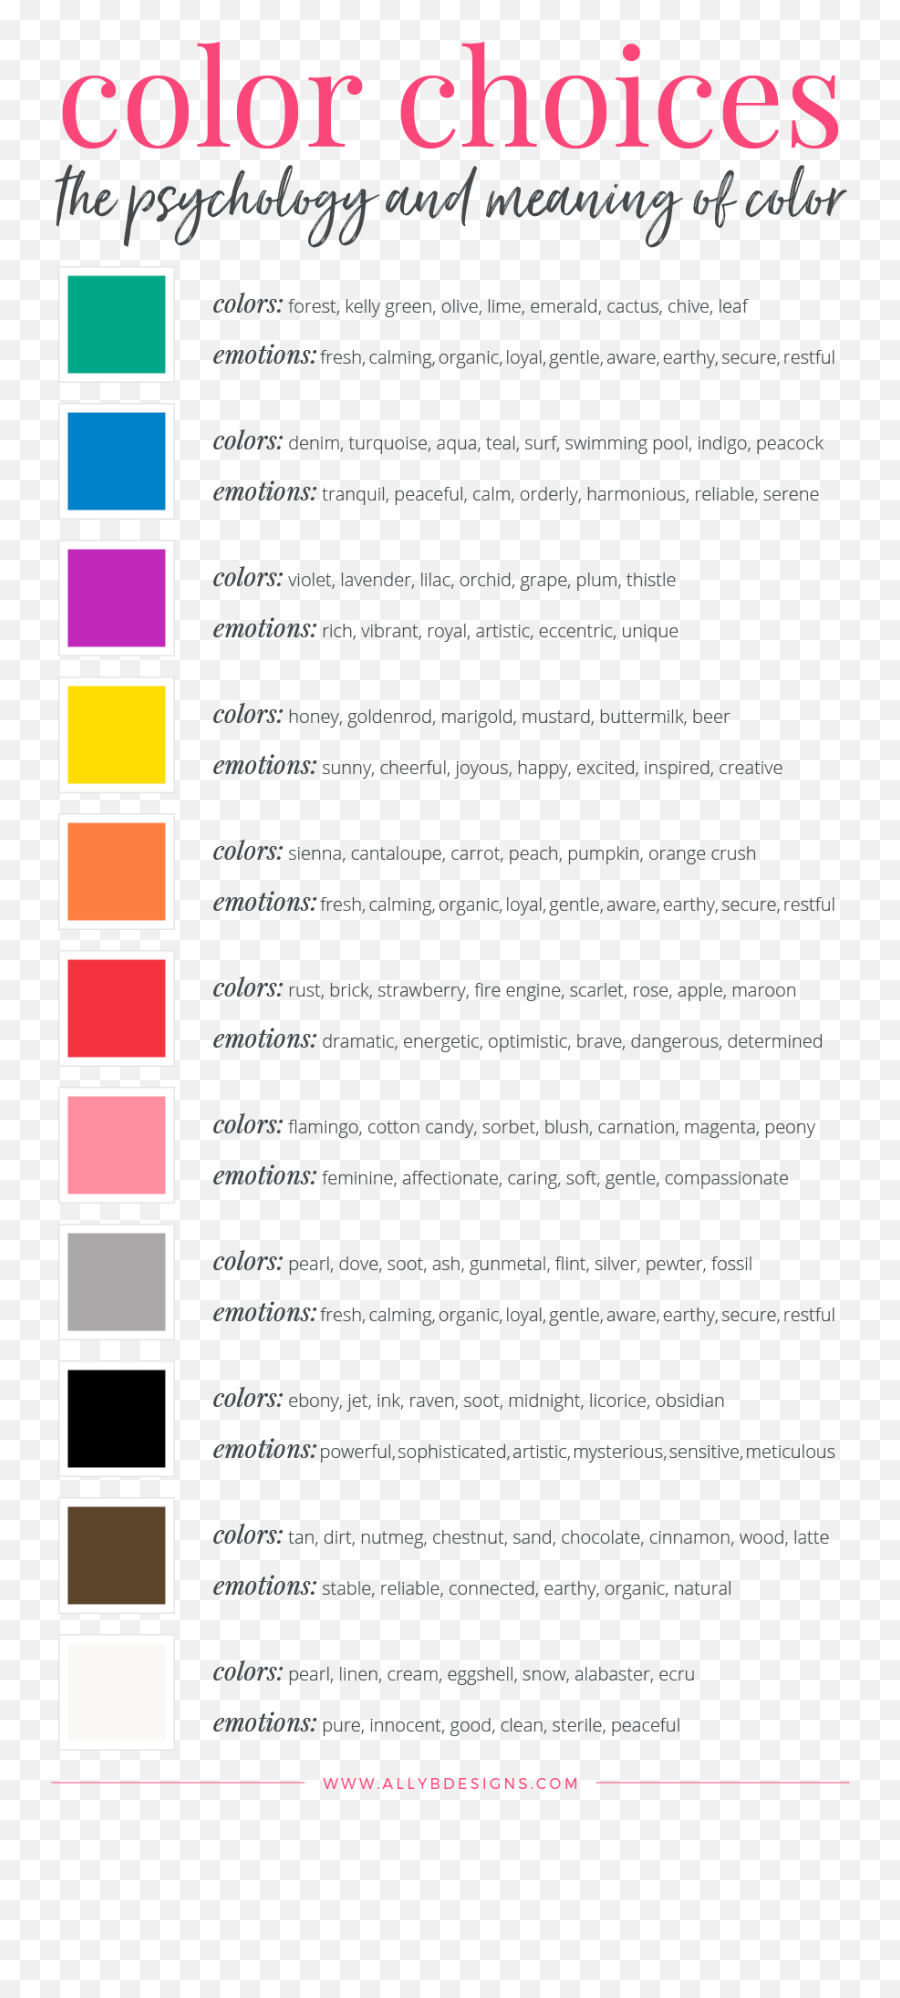 Choose The Perfect Brand Colors - Emotion Color Psychology Chart Emoji,Color Emotions Meanings